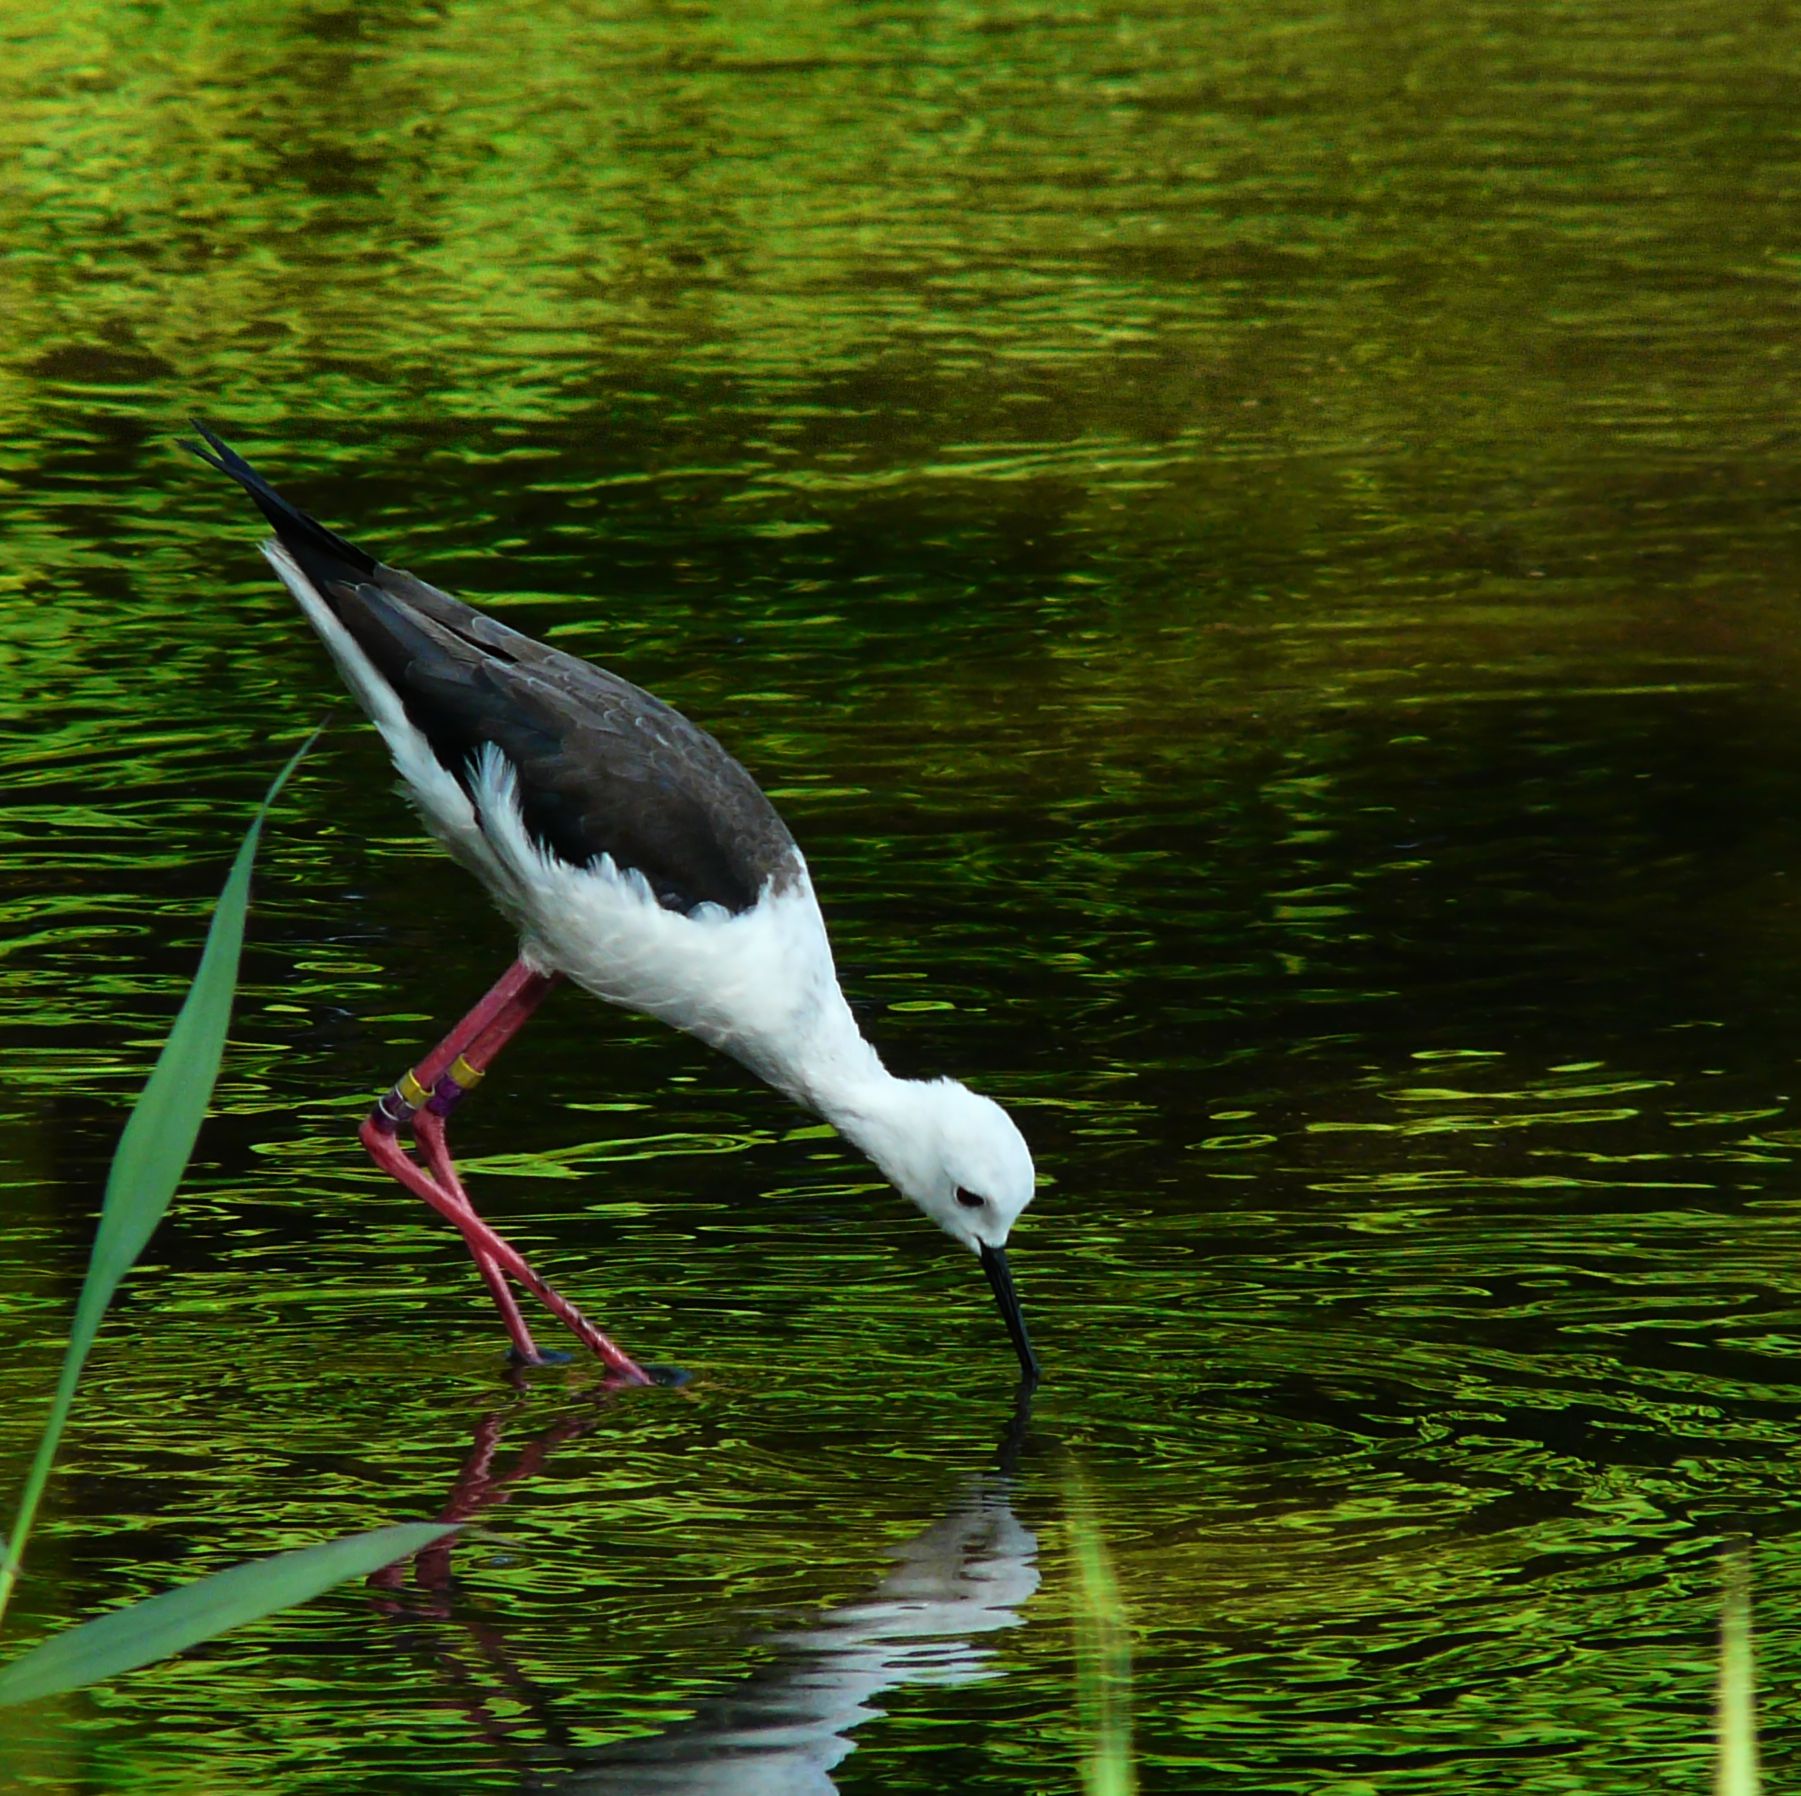 a stork walking in a pond picking food